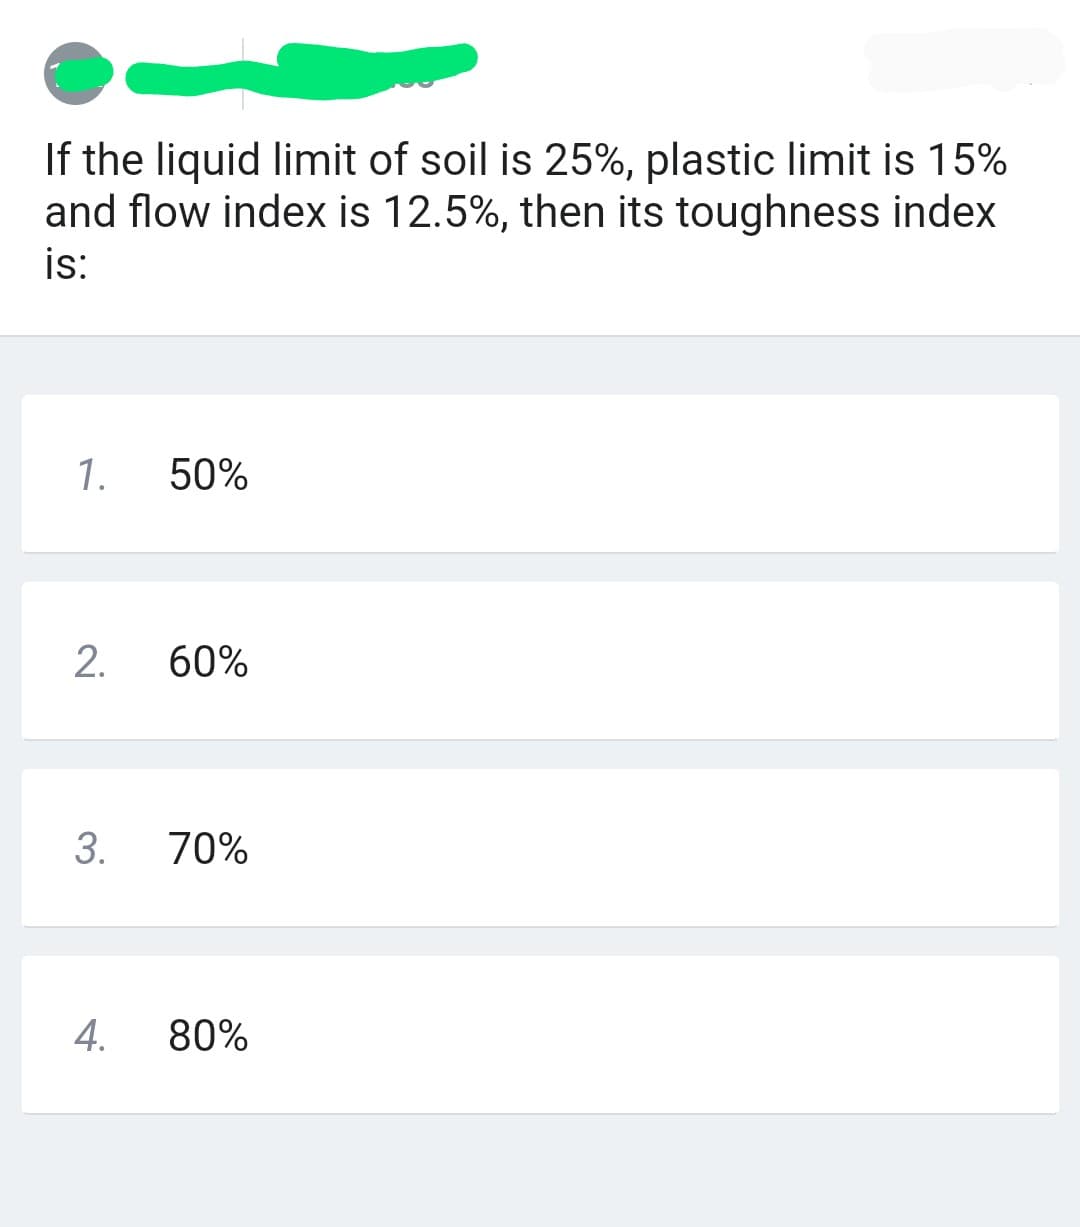 If the liquid limit of soil is 25%, plastic limit is 15%
and flow index is 12.5%, then its toughness index
is:
1.
50%
2.
60%
3. 70%
4. 80%